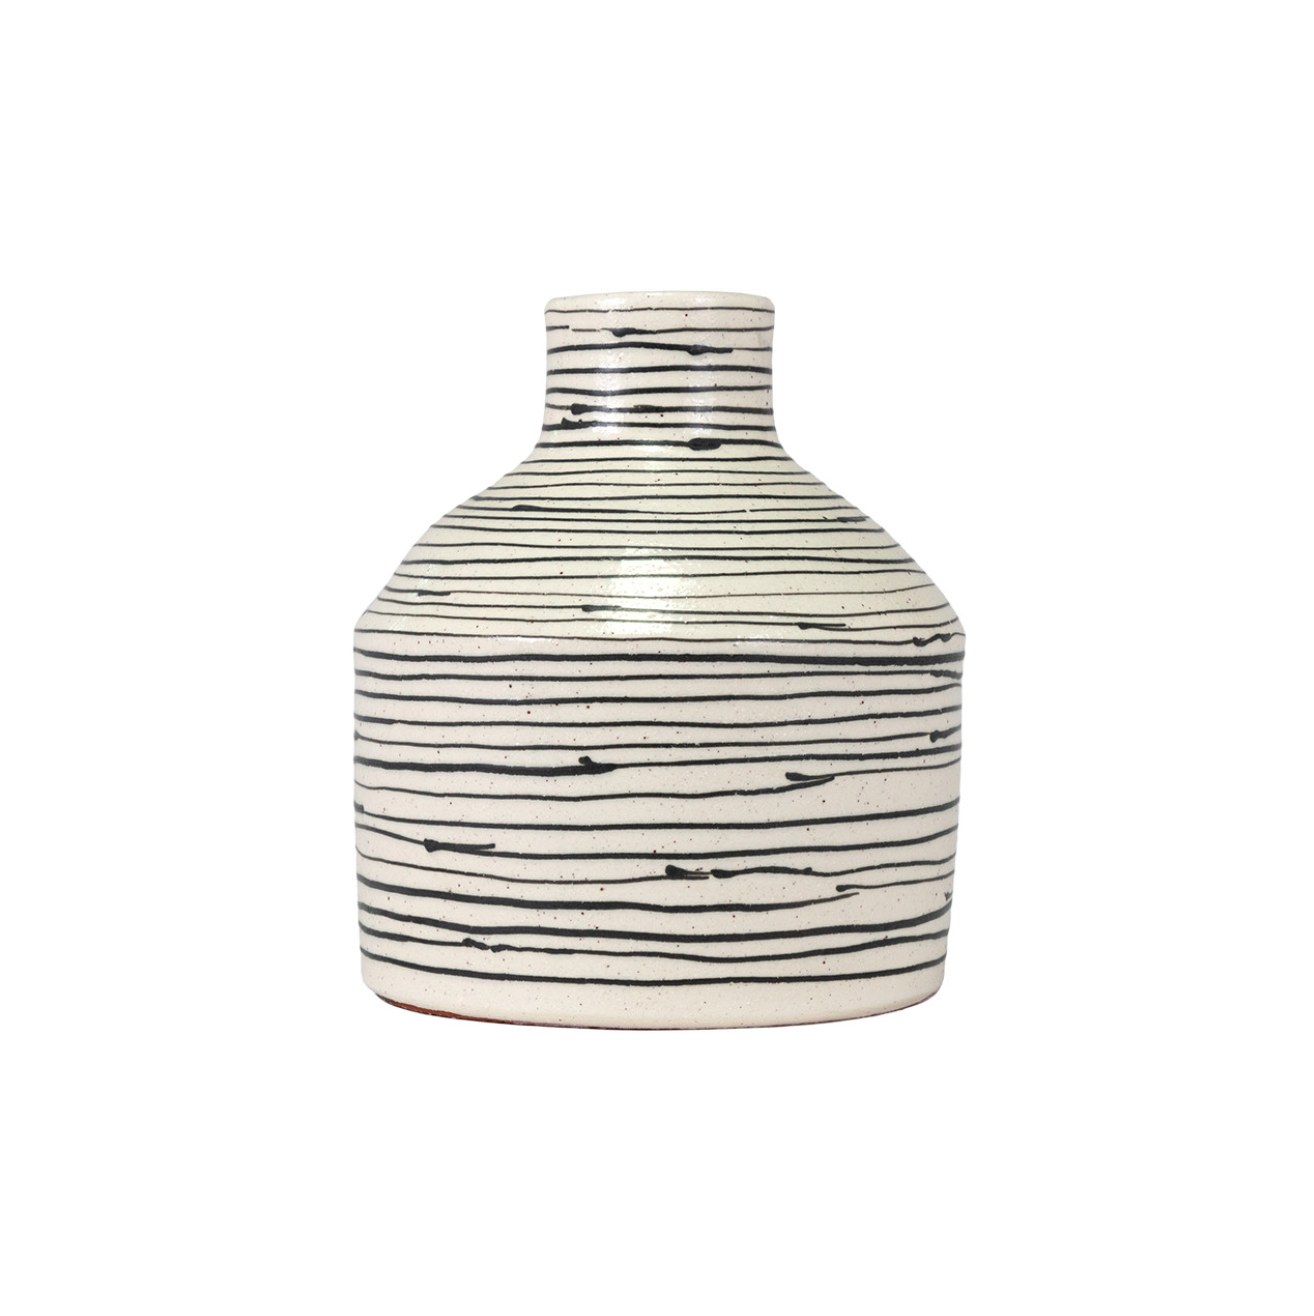 A Isha short vase from The Import Collection features a white base with black horizontal stripes, some lines smeared slightly, against a plain white background in a Scottsdale, Arizona bungalow.